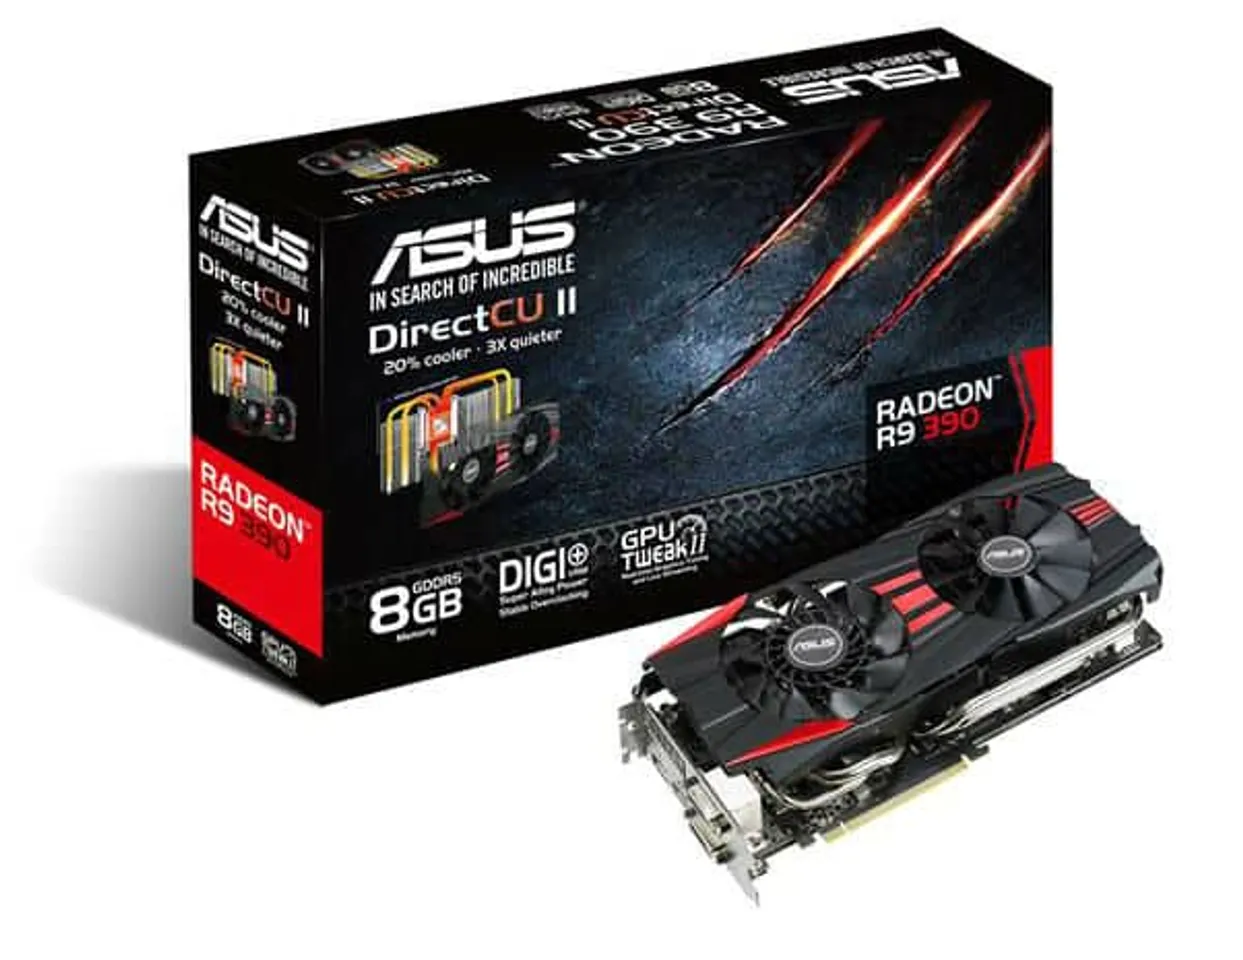 ASUS Announces Fast and Armor-protected Strix Graphic Cards in India